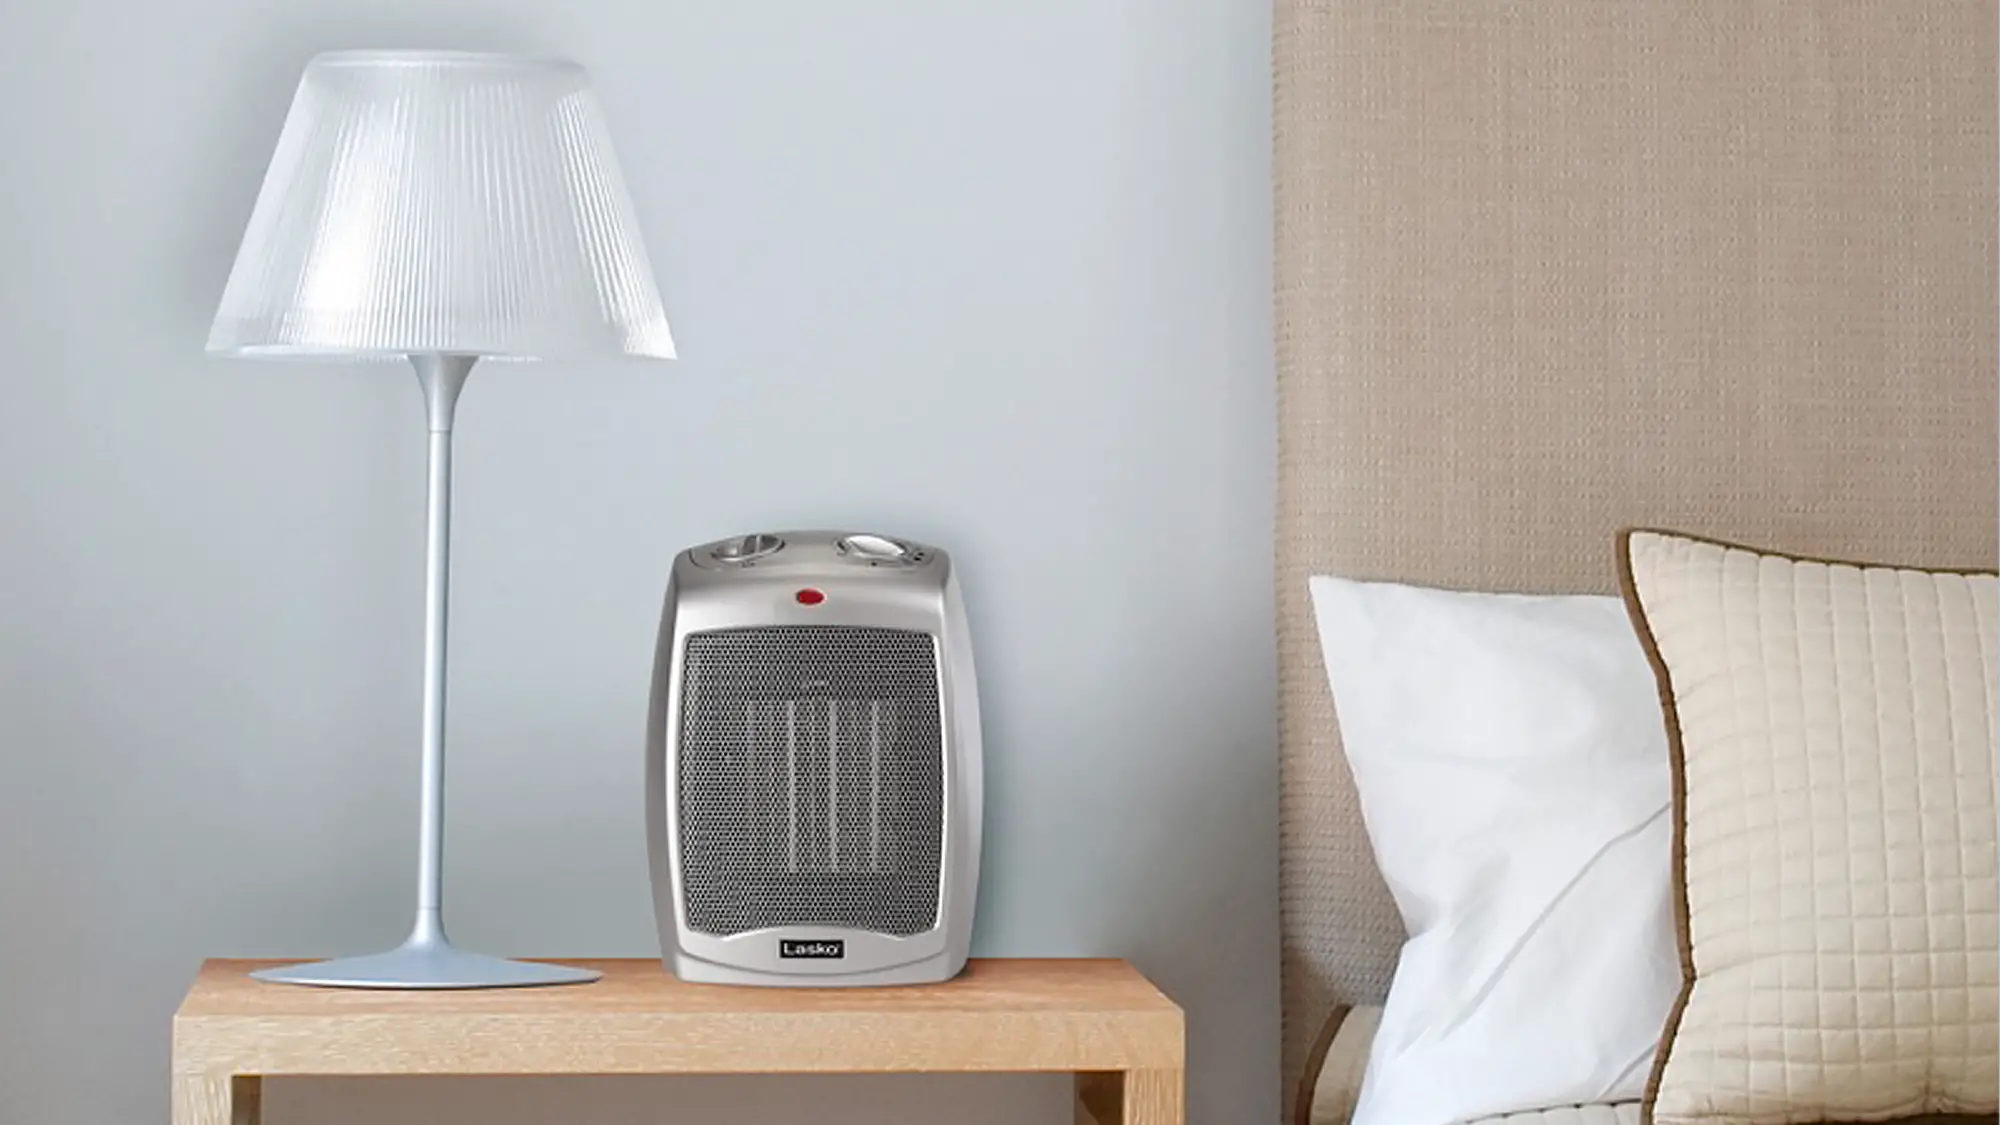 Tips on how to use and take care of Lasko Heaters